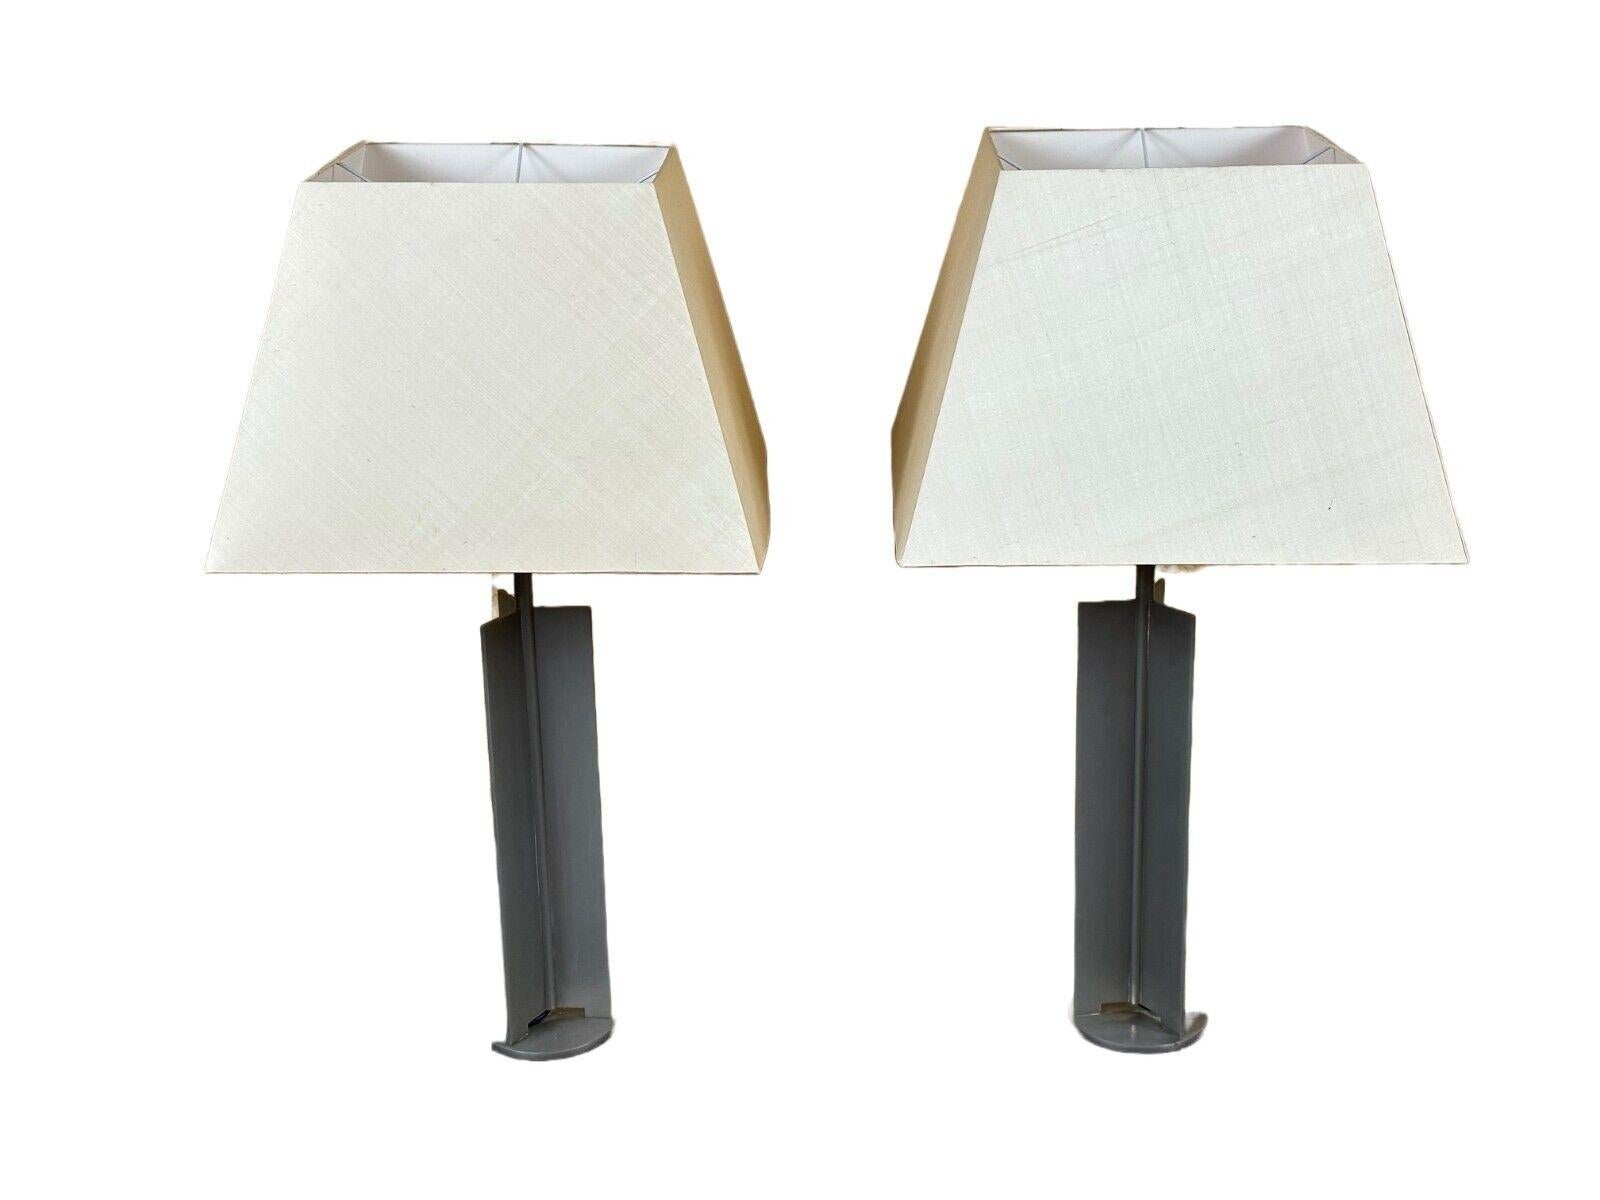 2x 60s 70s XL table lamp table lamp aluminum metal space age design

Object: 2x table lamp

Manufacturer:

Condition: good - vintage

Age: around 1960-1970

Dimensions:

Width = 42cm
Depth = 42cm
Height = 79cm

Other notes:

2x E27 socket - per